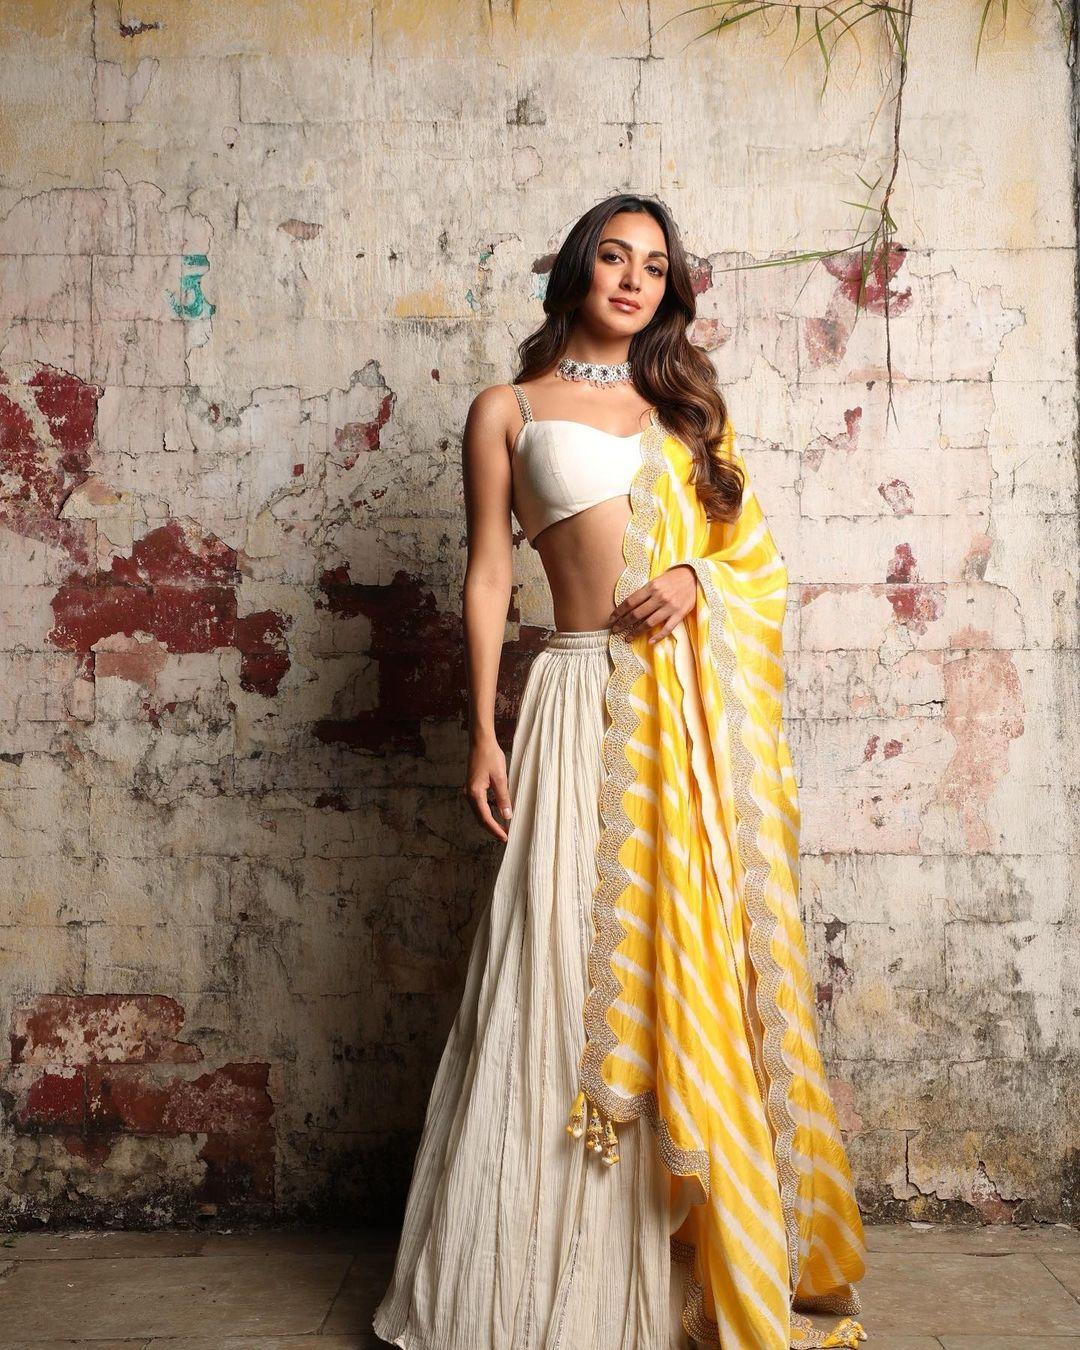 If yellow is not your colour, but Mom has asked you to match the vibe, worry not! We've got you covered with Kiara Advani's pretty lehenga